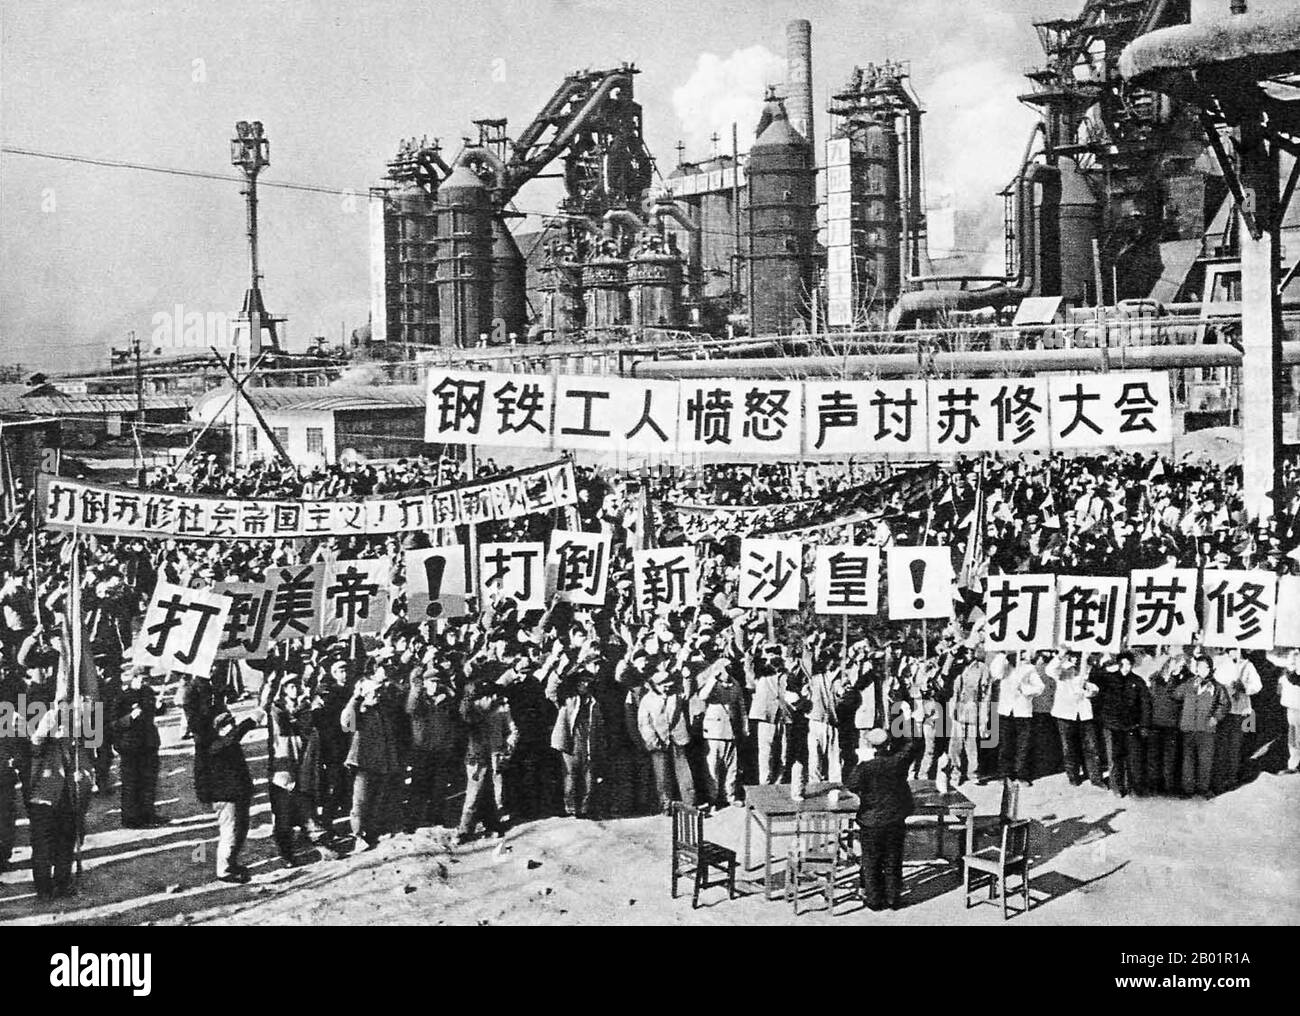 China: Workers at the Paotou Iron and Steel Company, express their contempt for the 'New Tsars', 1969.  Down with the New Tsars!: Soviet Revisionists’ Anti-China Atrocities on the Heilung and Wusuli Rivers.  By March 1969, Sino-Russian border rivalries led to the Sino-Soviet border conflict at the Ussuri River and on Damansky-Zhenbao Island; more small-scale warfare occurred at Tielieketi in August. Stock Photo